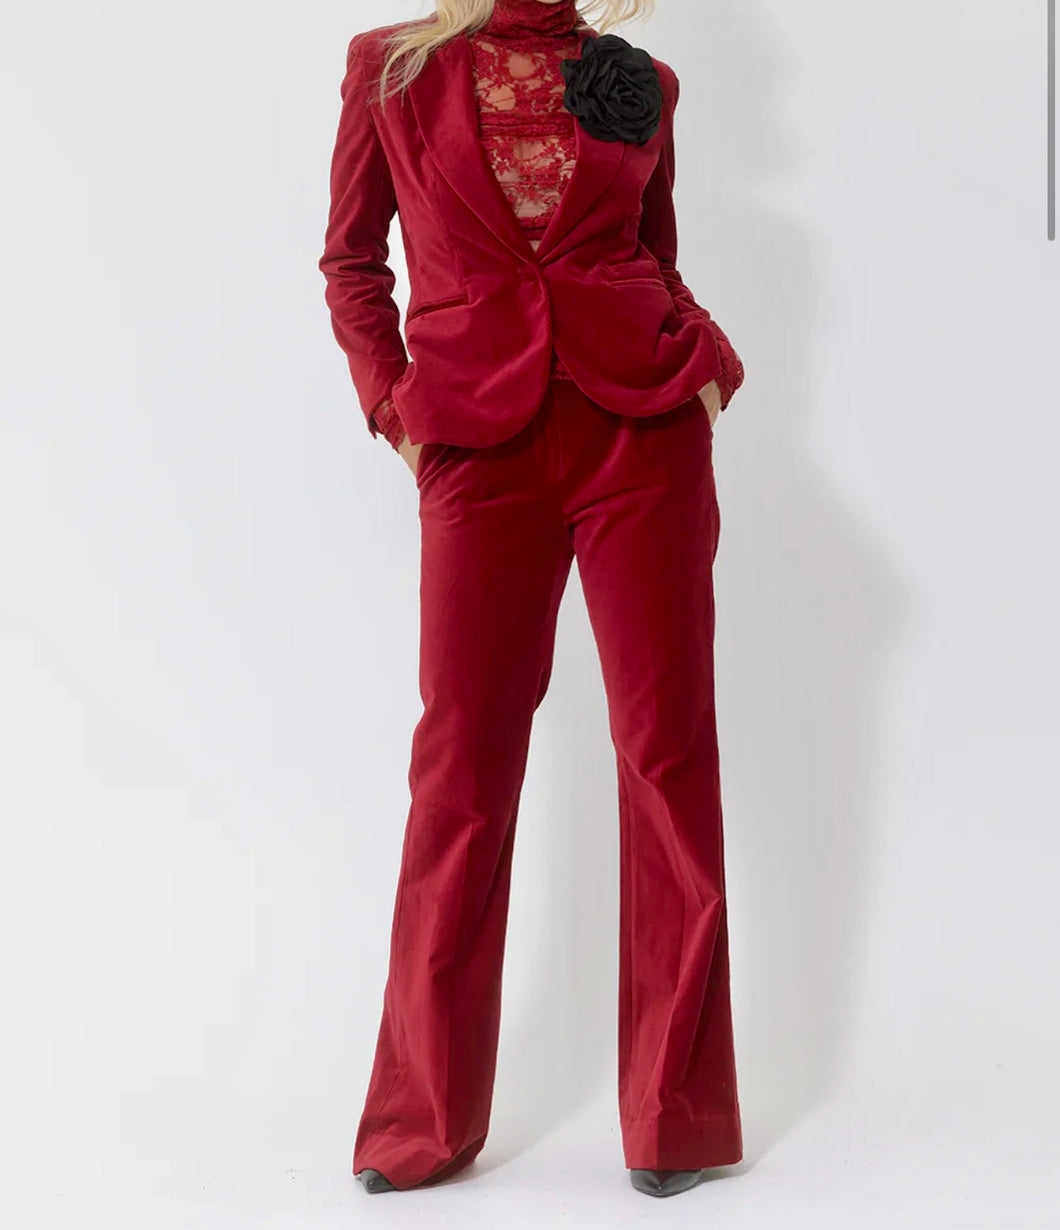 Velvet Bootleg Pant In Ruby By Joey The Label